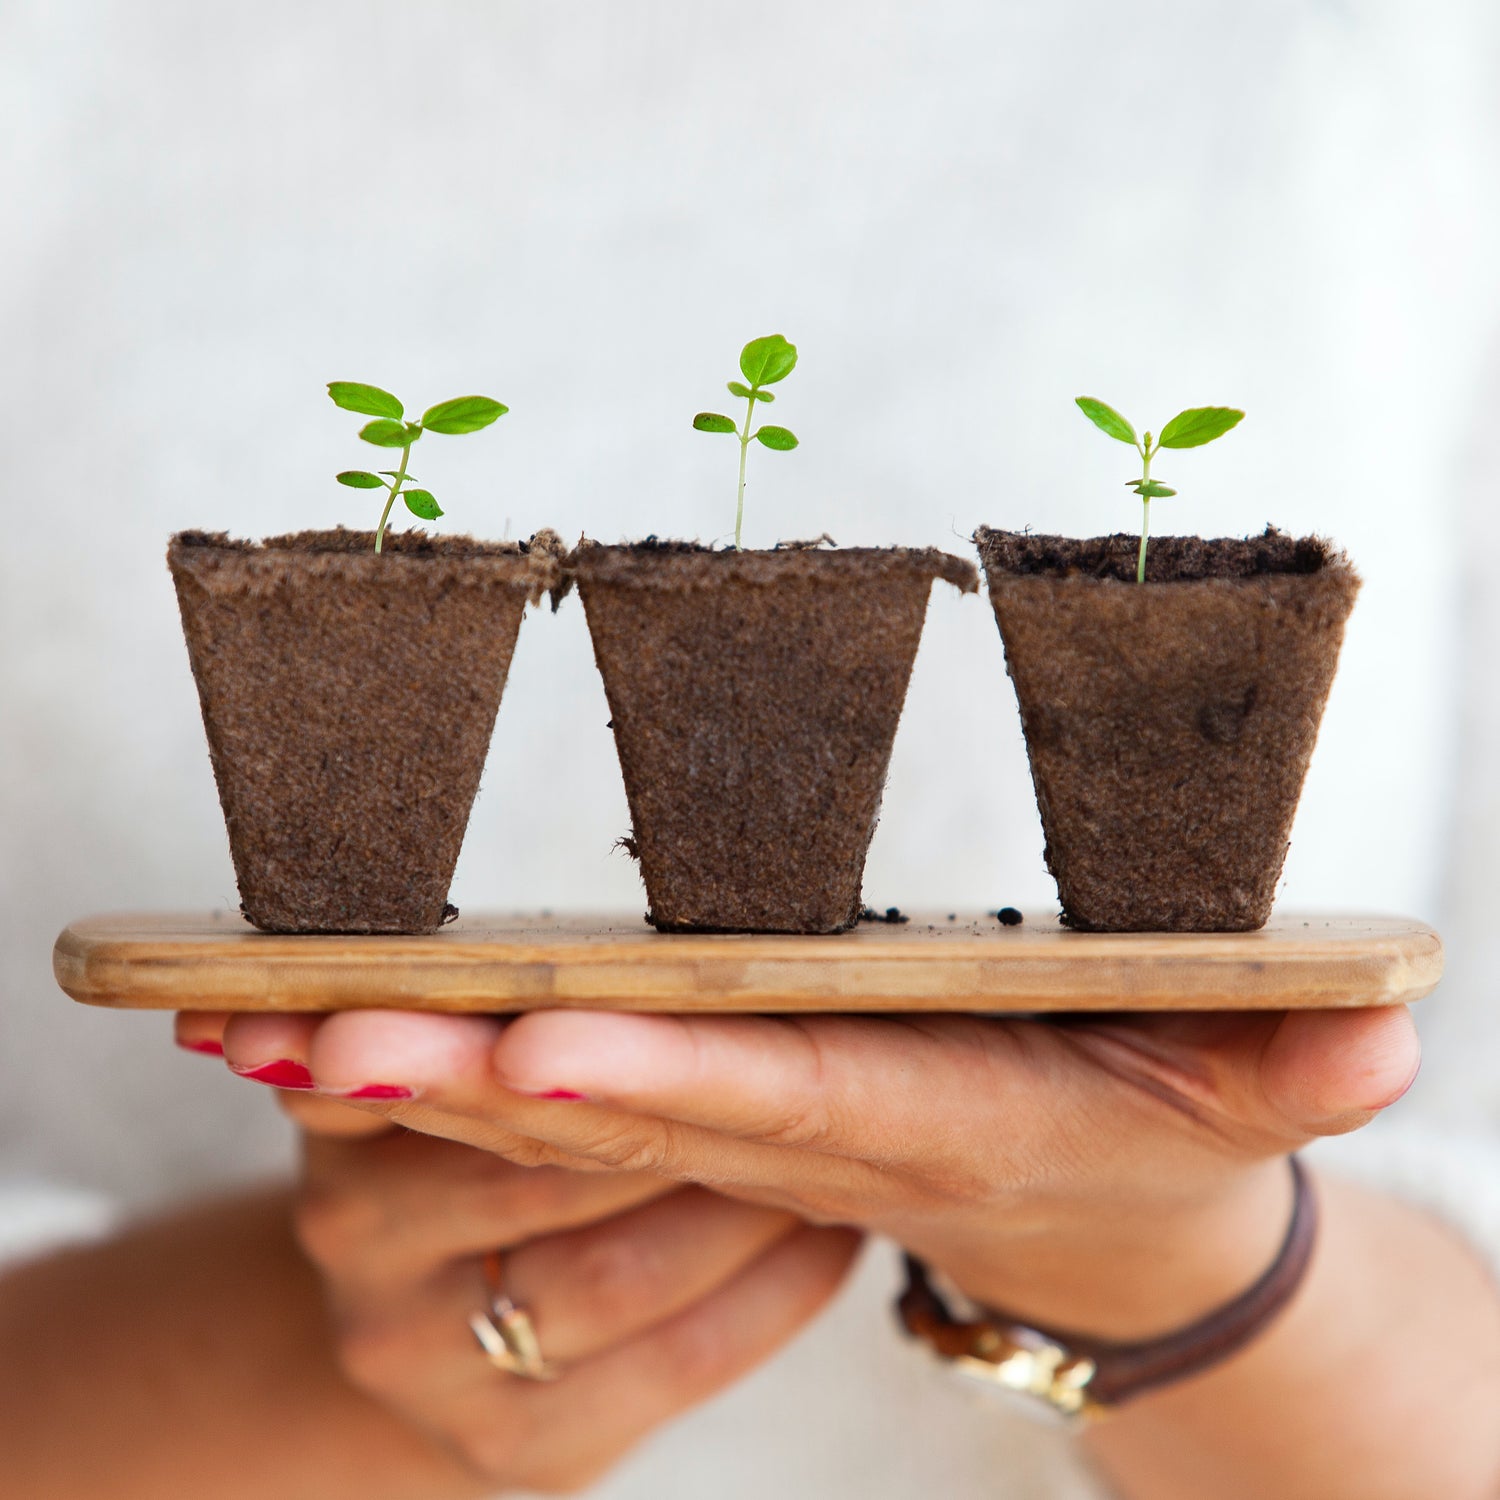 Person holding tray with three baby plant saplings.